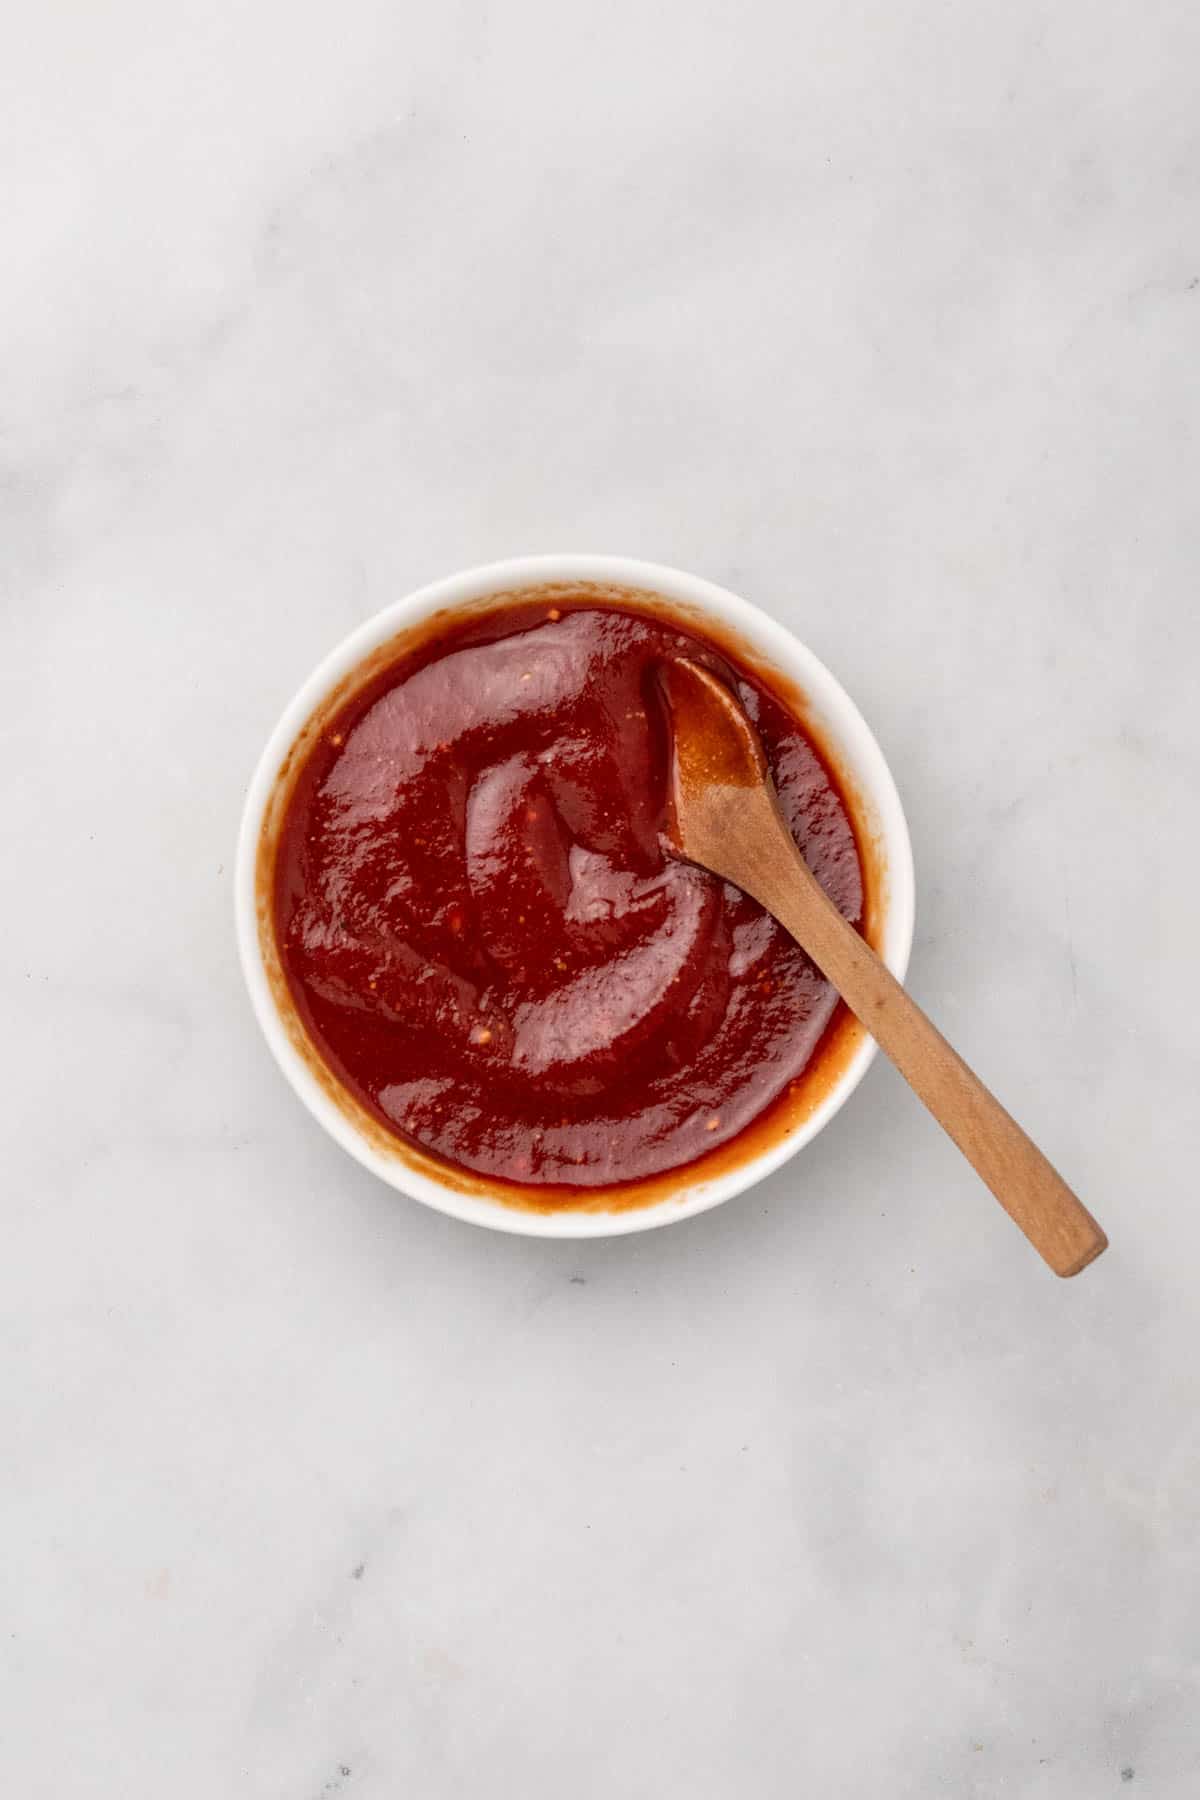 Tomato glaze mixed in a small ramekin with a wooden spoon